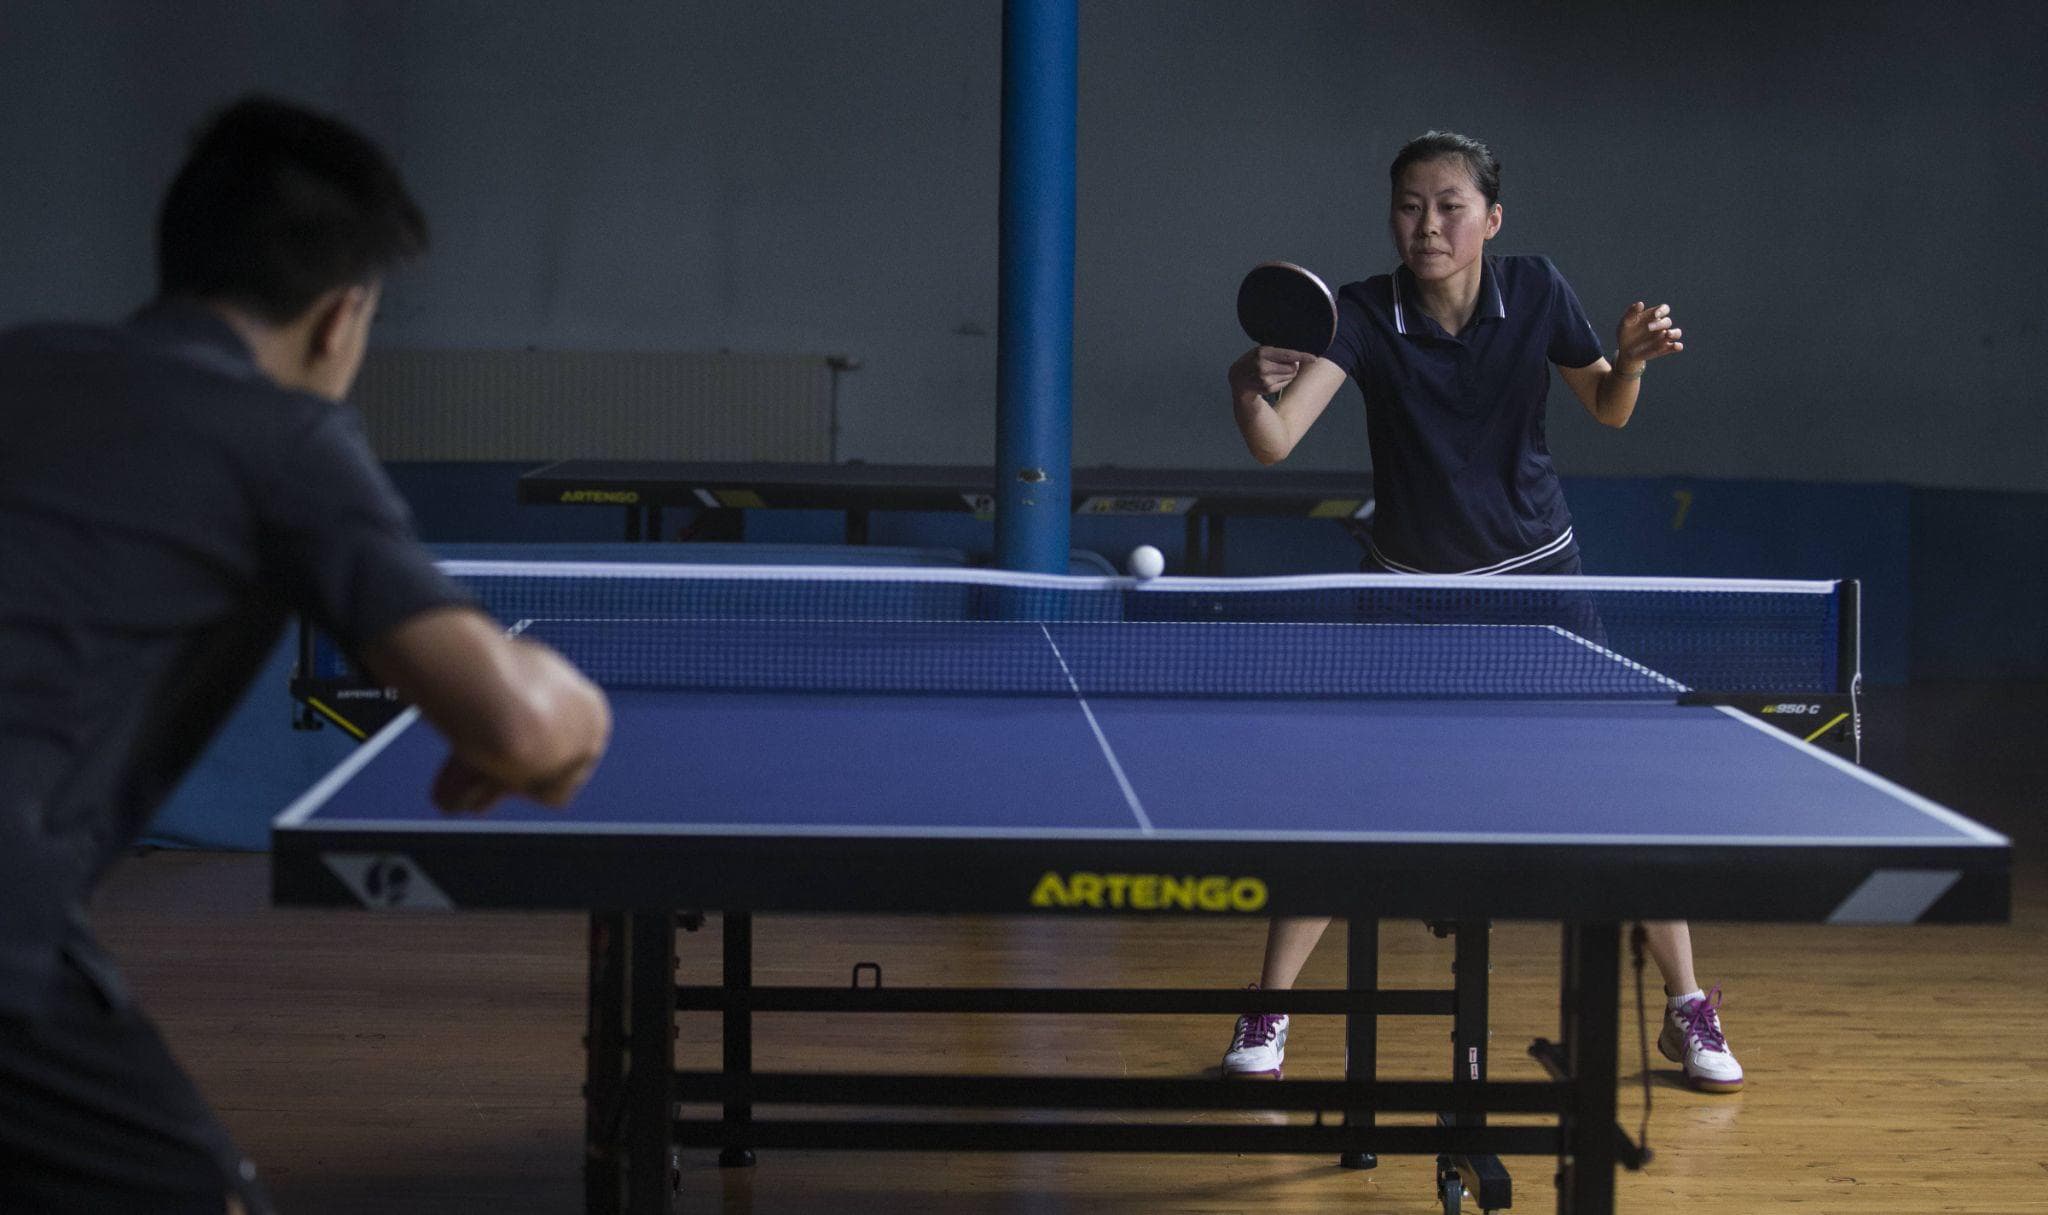 Unusual Table Tennis Equipment in the World of Online Casinos